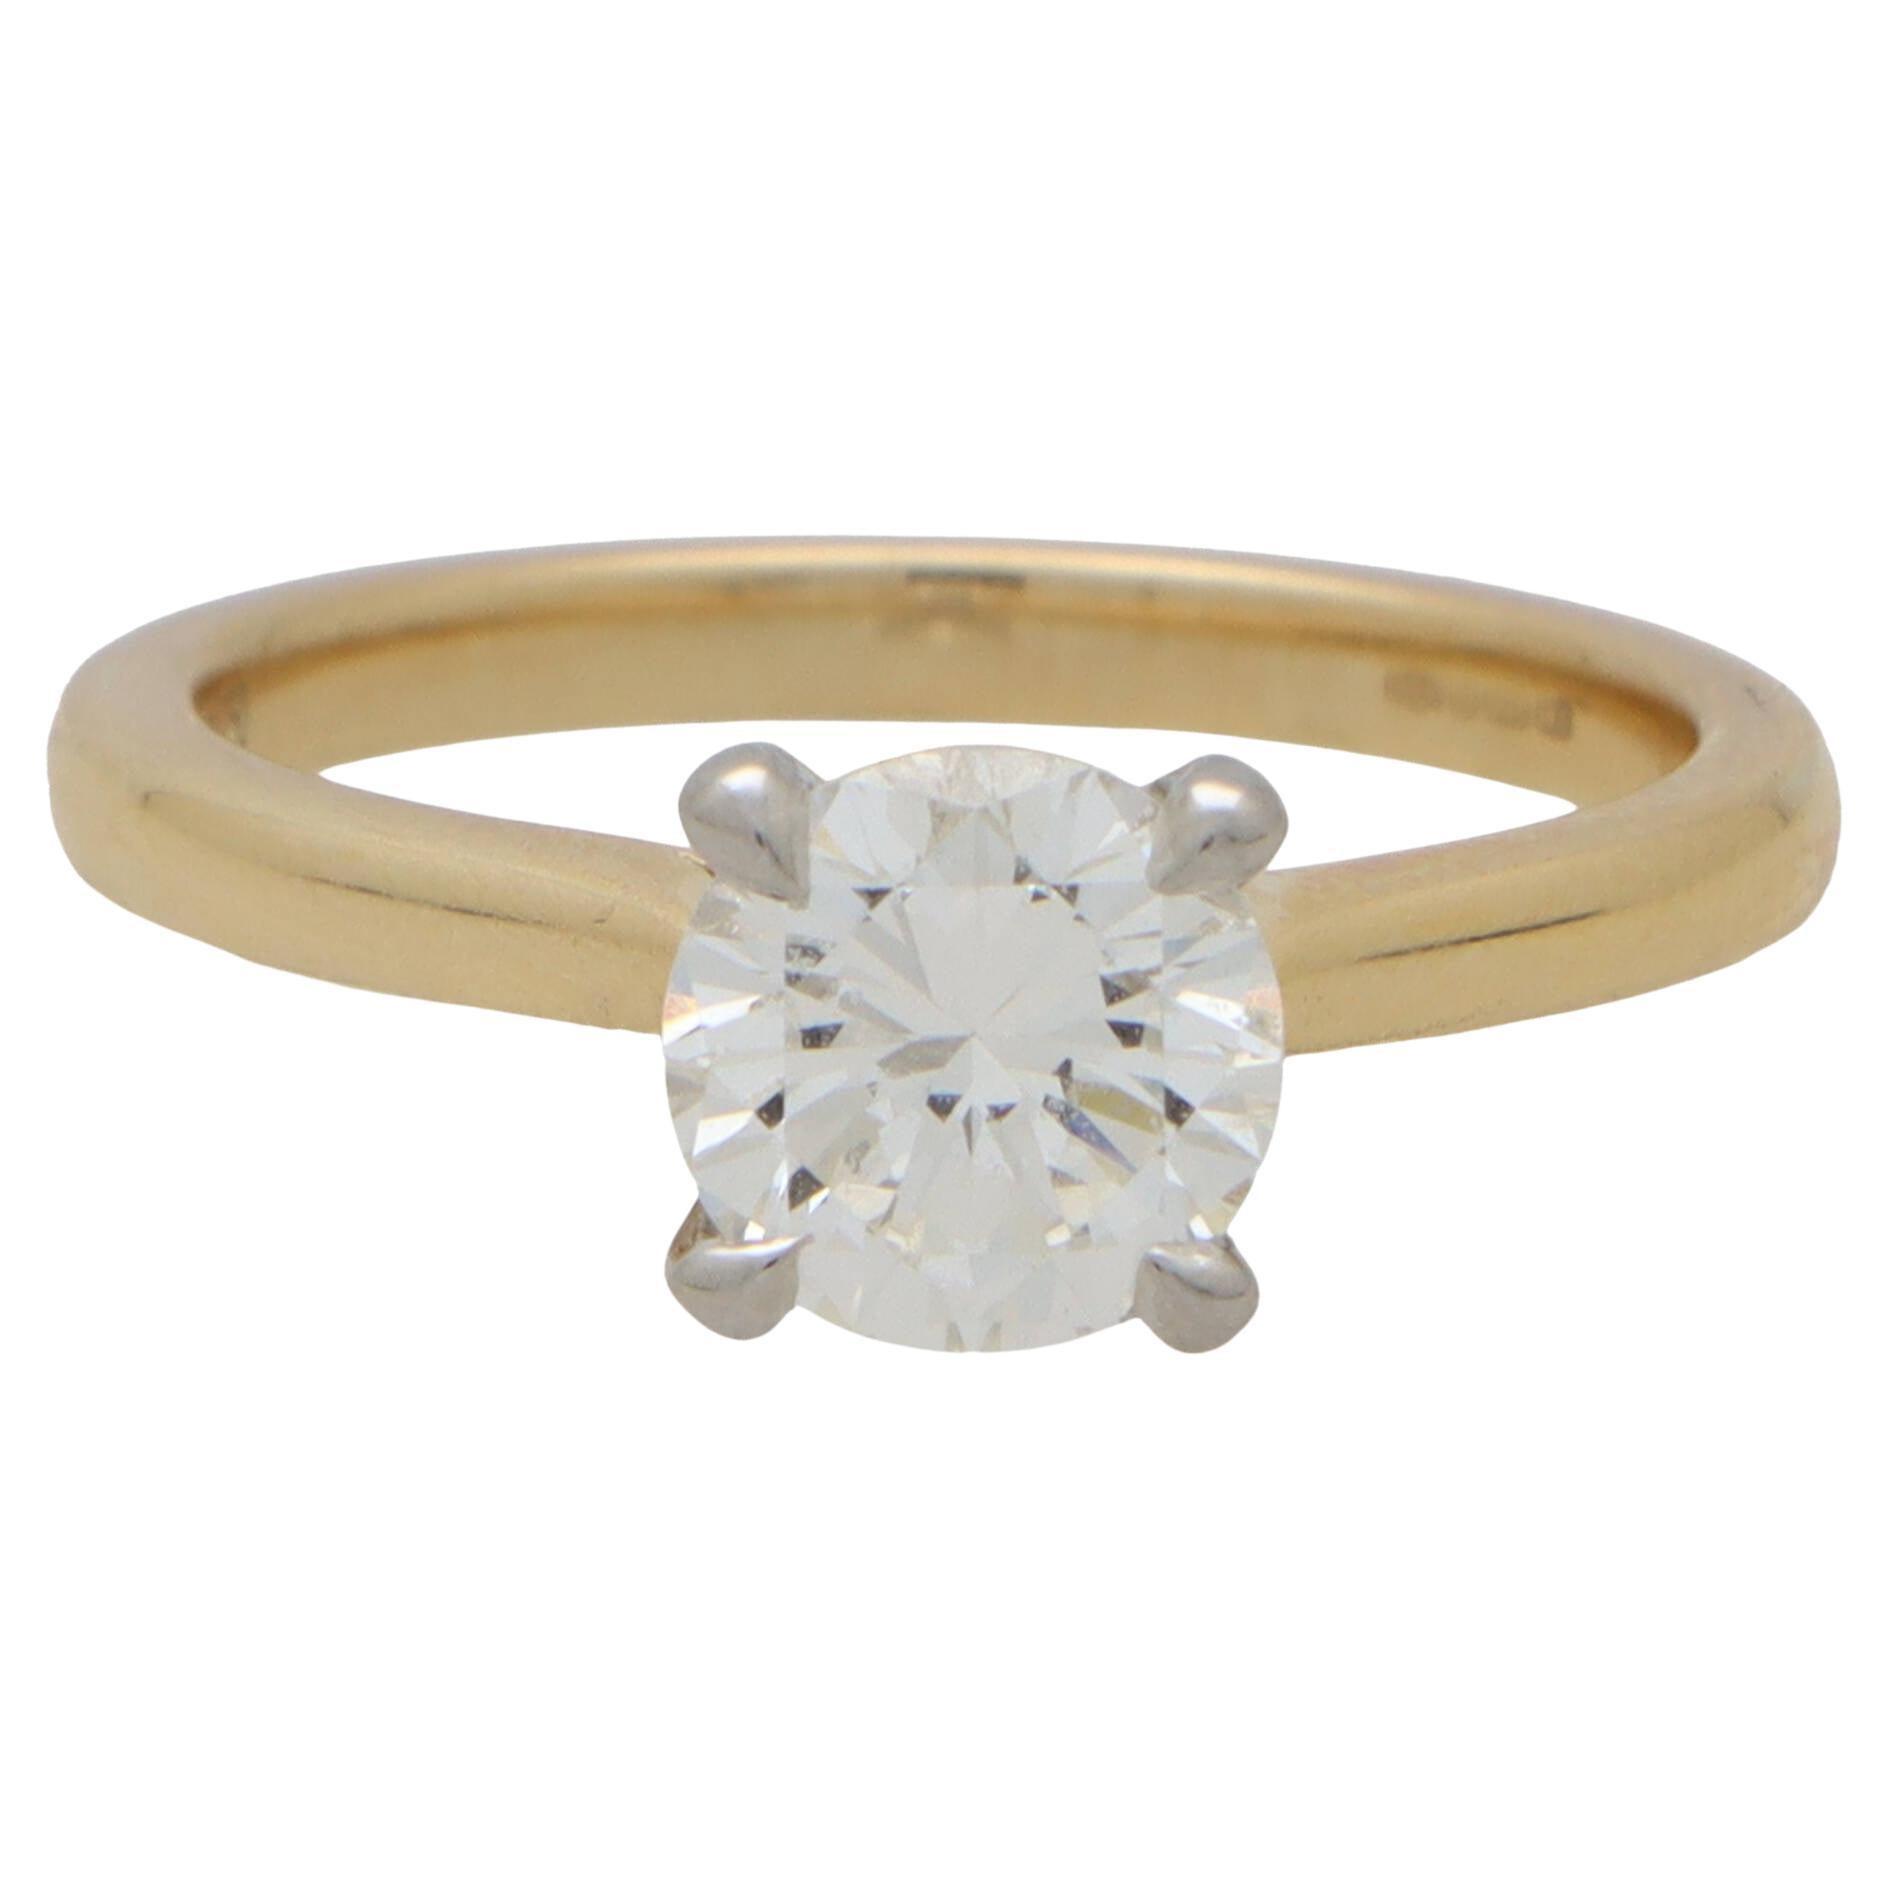  Certified Round Brilliant Cut Diamond Solitaire Ring in Platinum and Gold